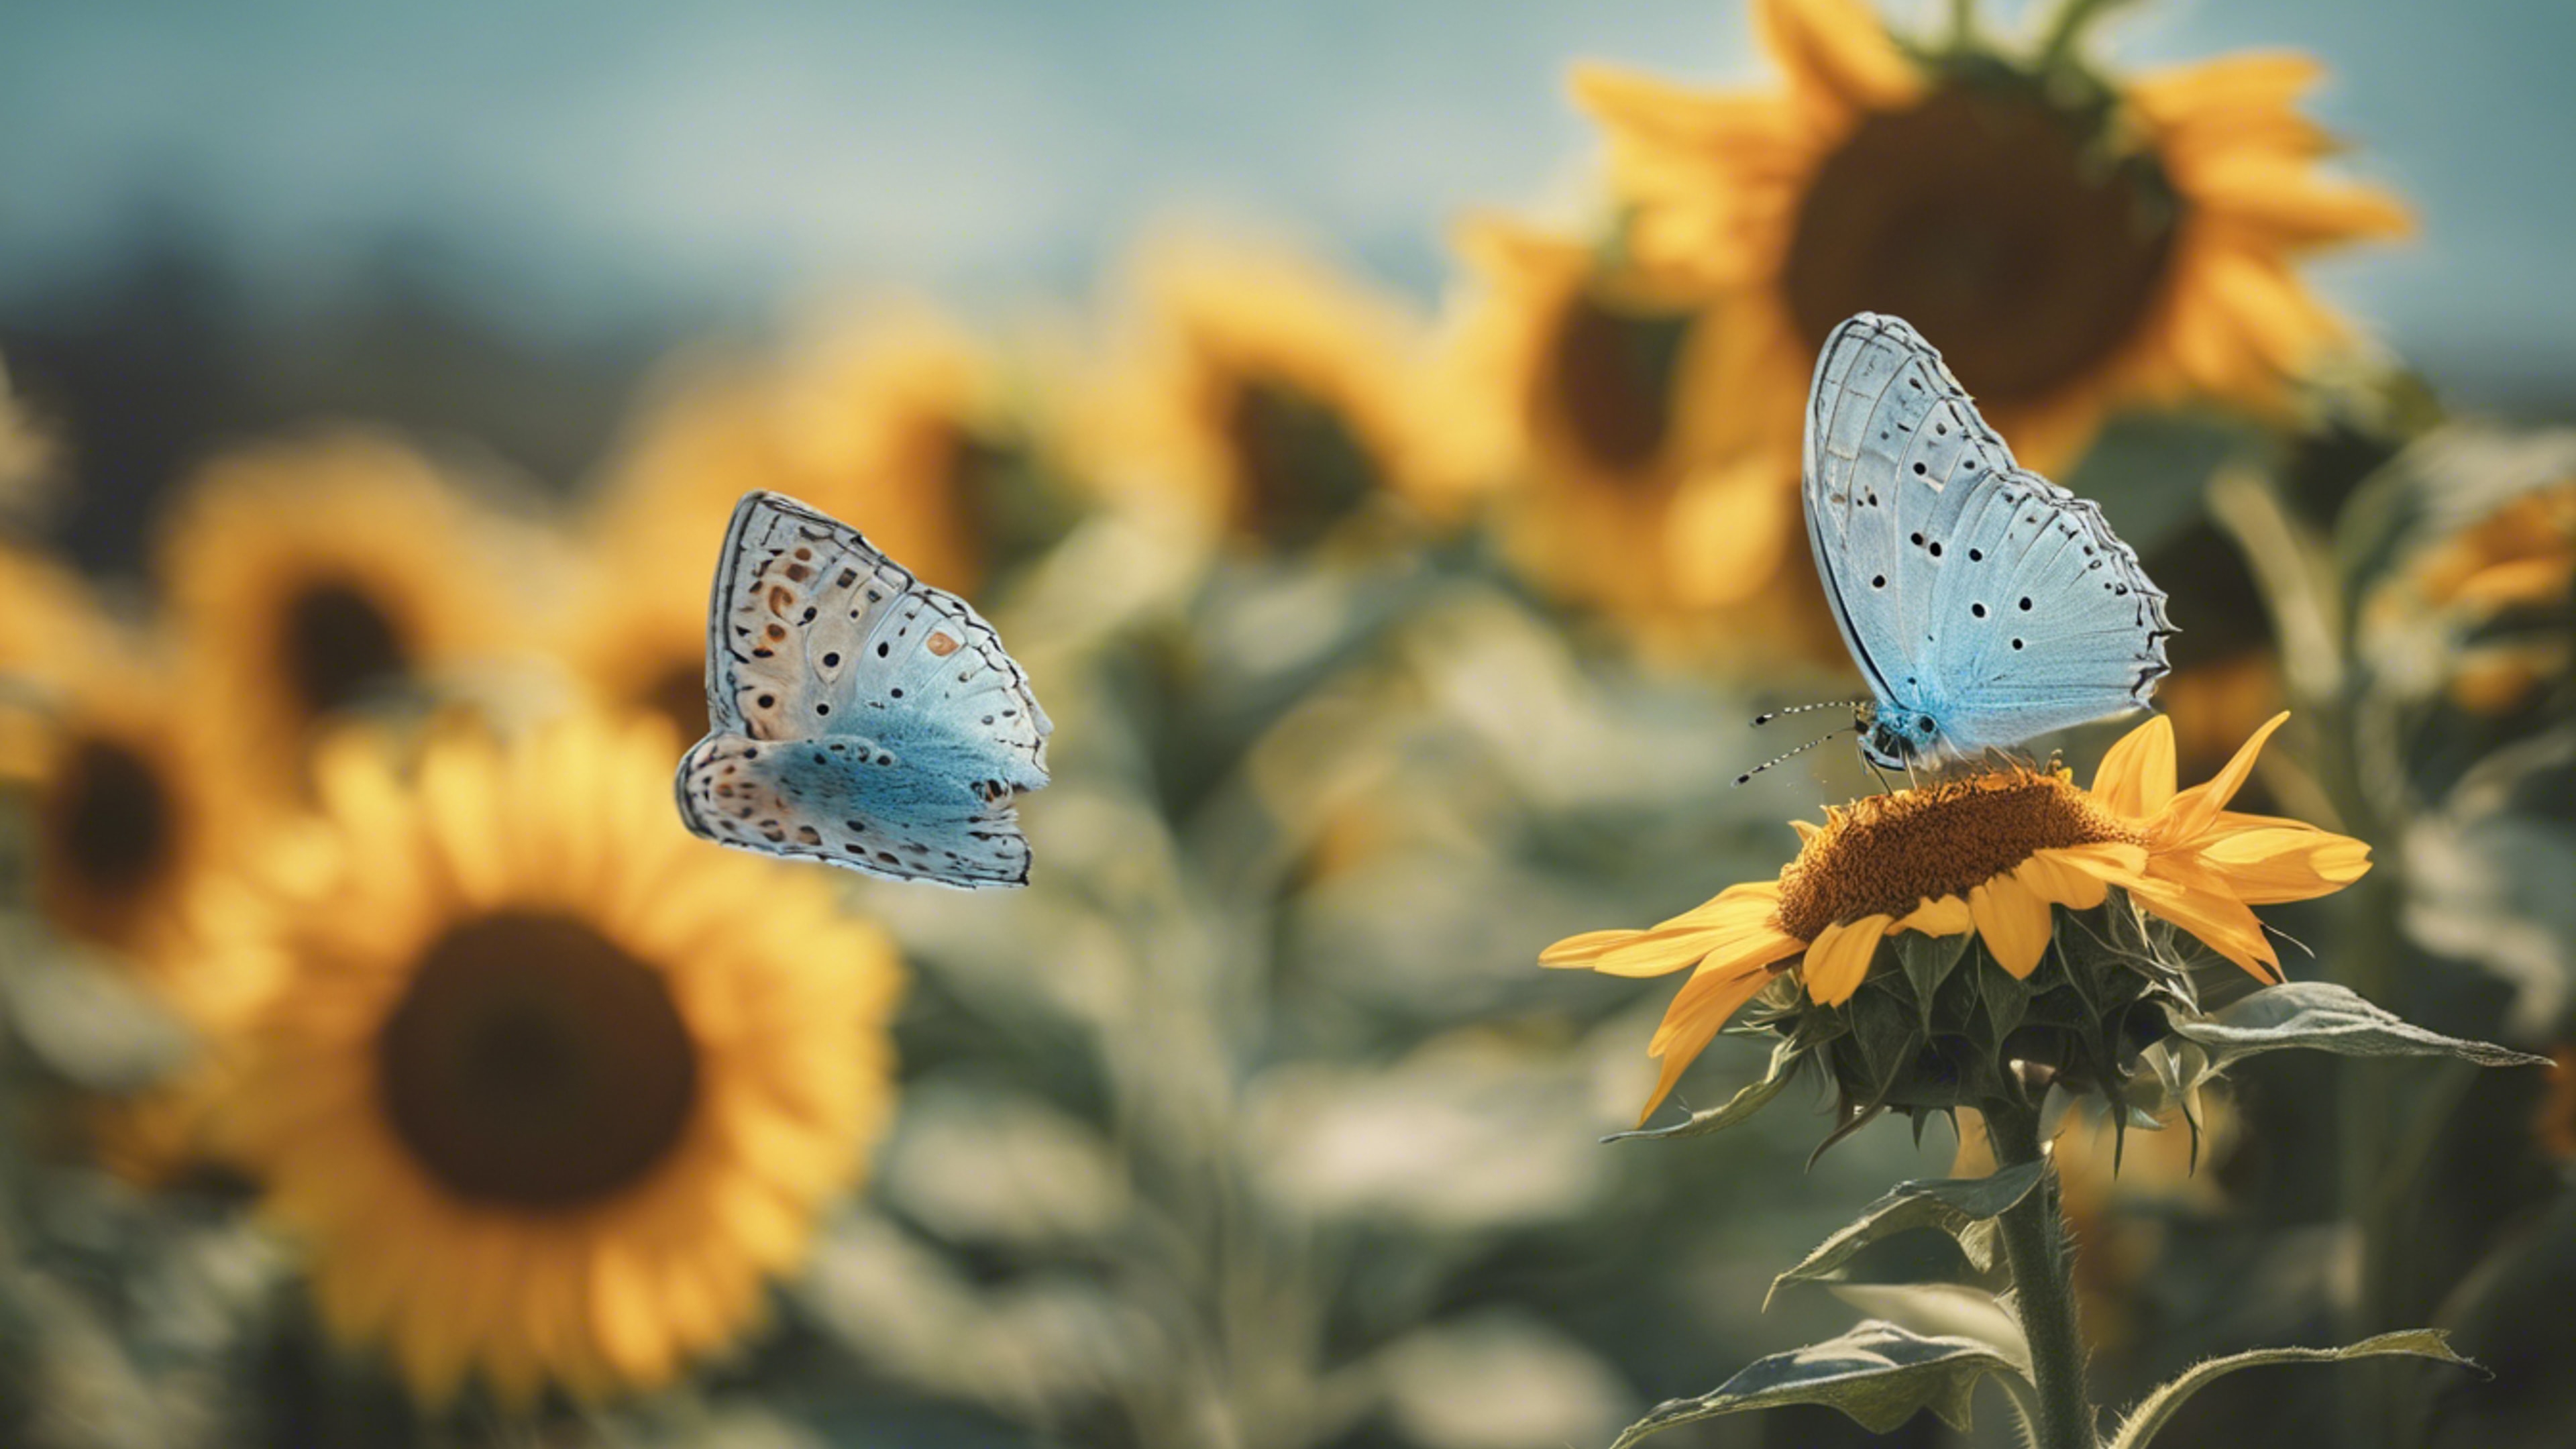 A pastel blue spotted butterfly resting on a sunflower.壁紙[f5640df3fefb4cee9f34]